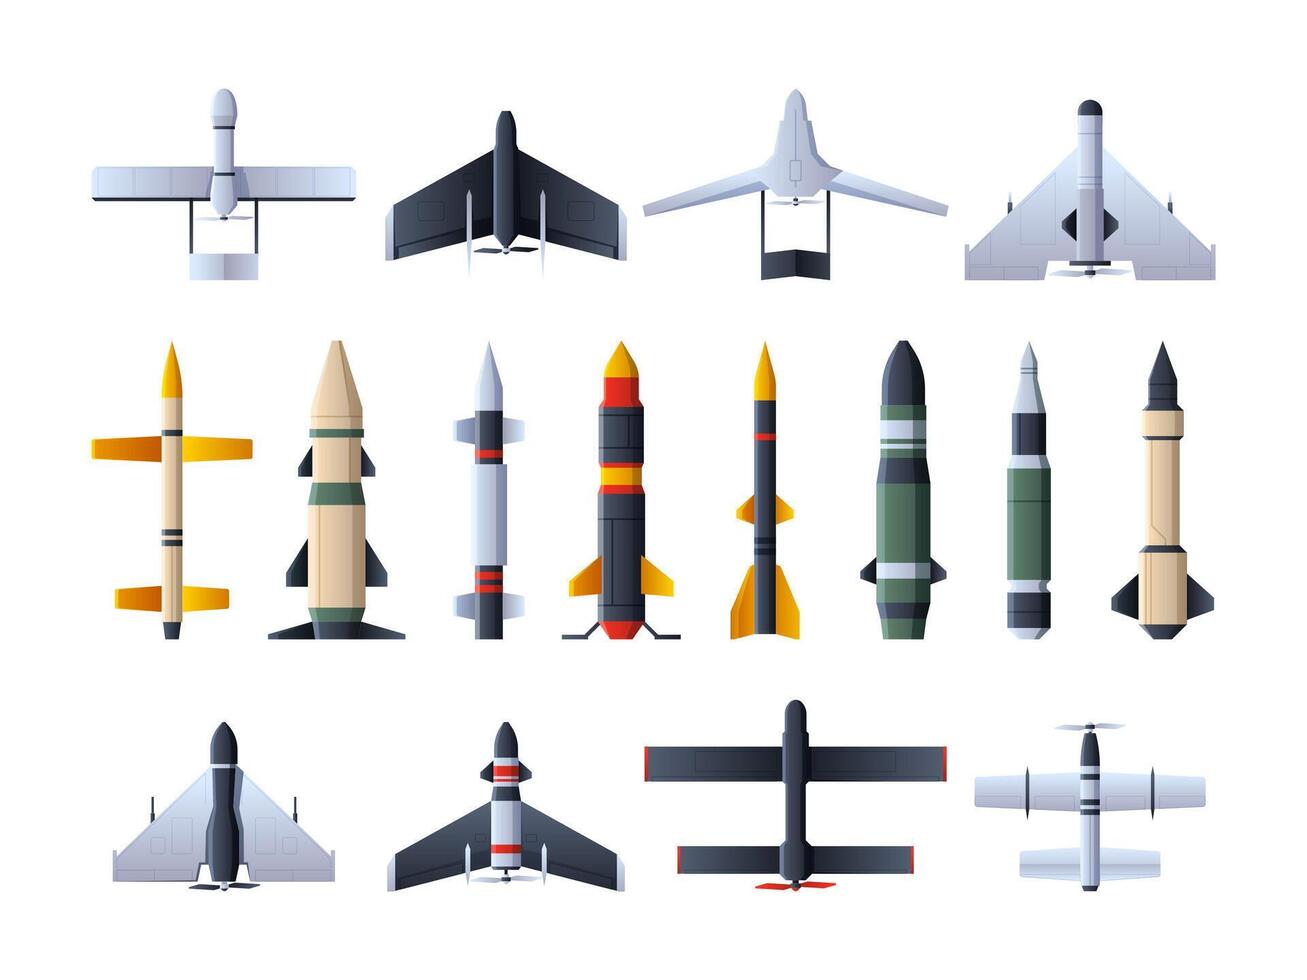 Military missiles and drones. Ballistic rockets with warhead unmanned army aircraft for intelligence, attack and air defense, loitering weapon. Vector set